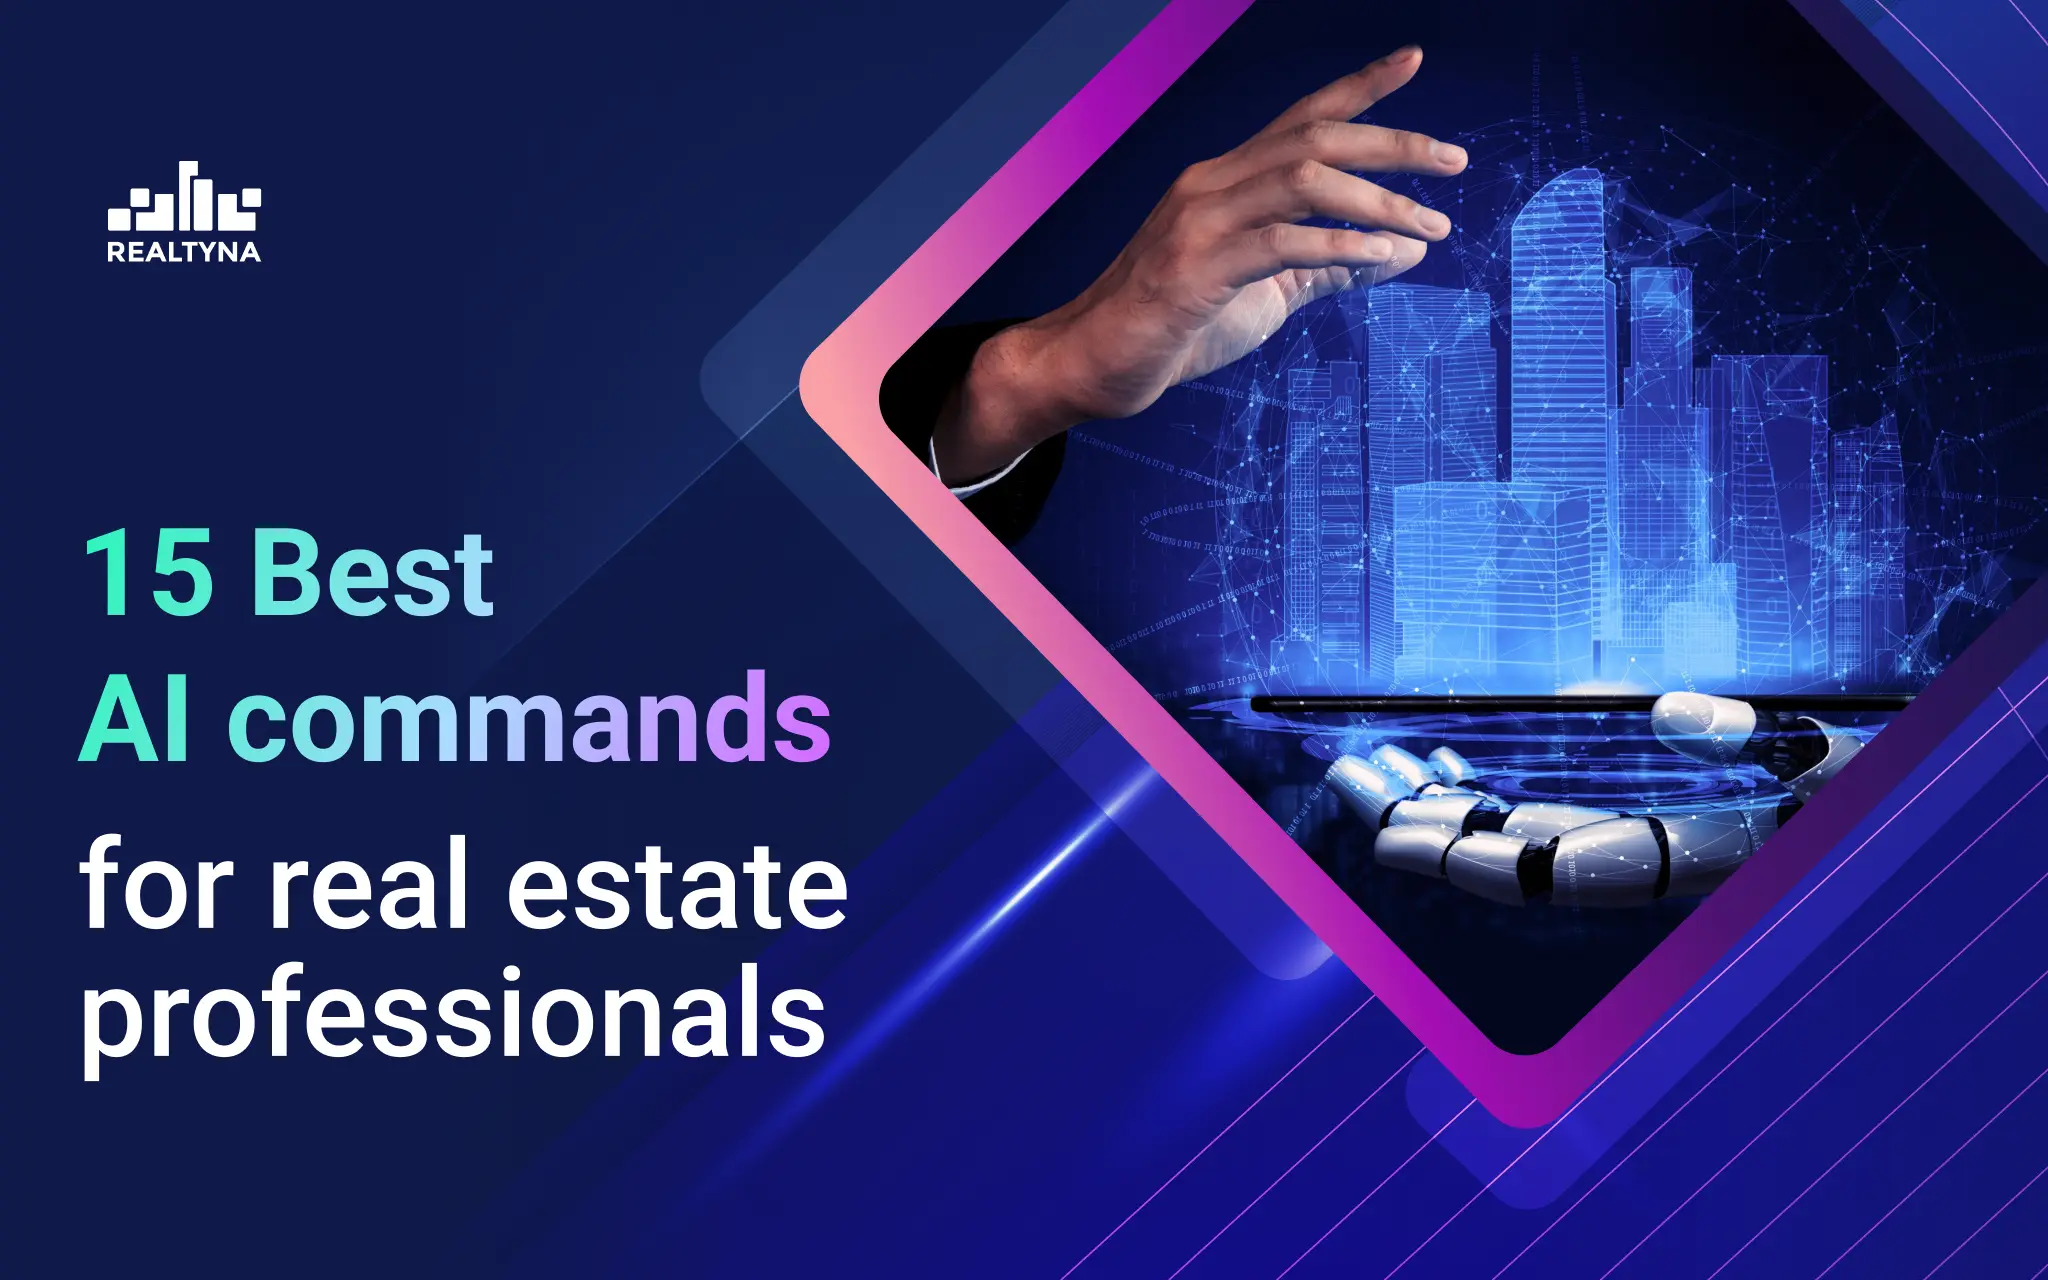 15 Best AI Commands for Real Estate Professionals